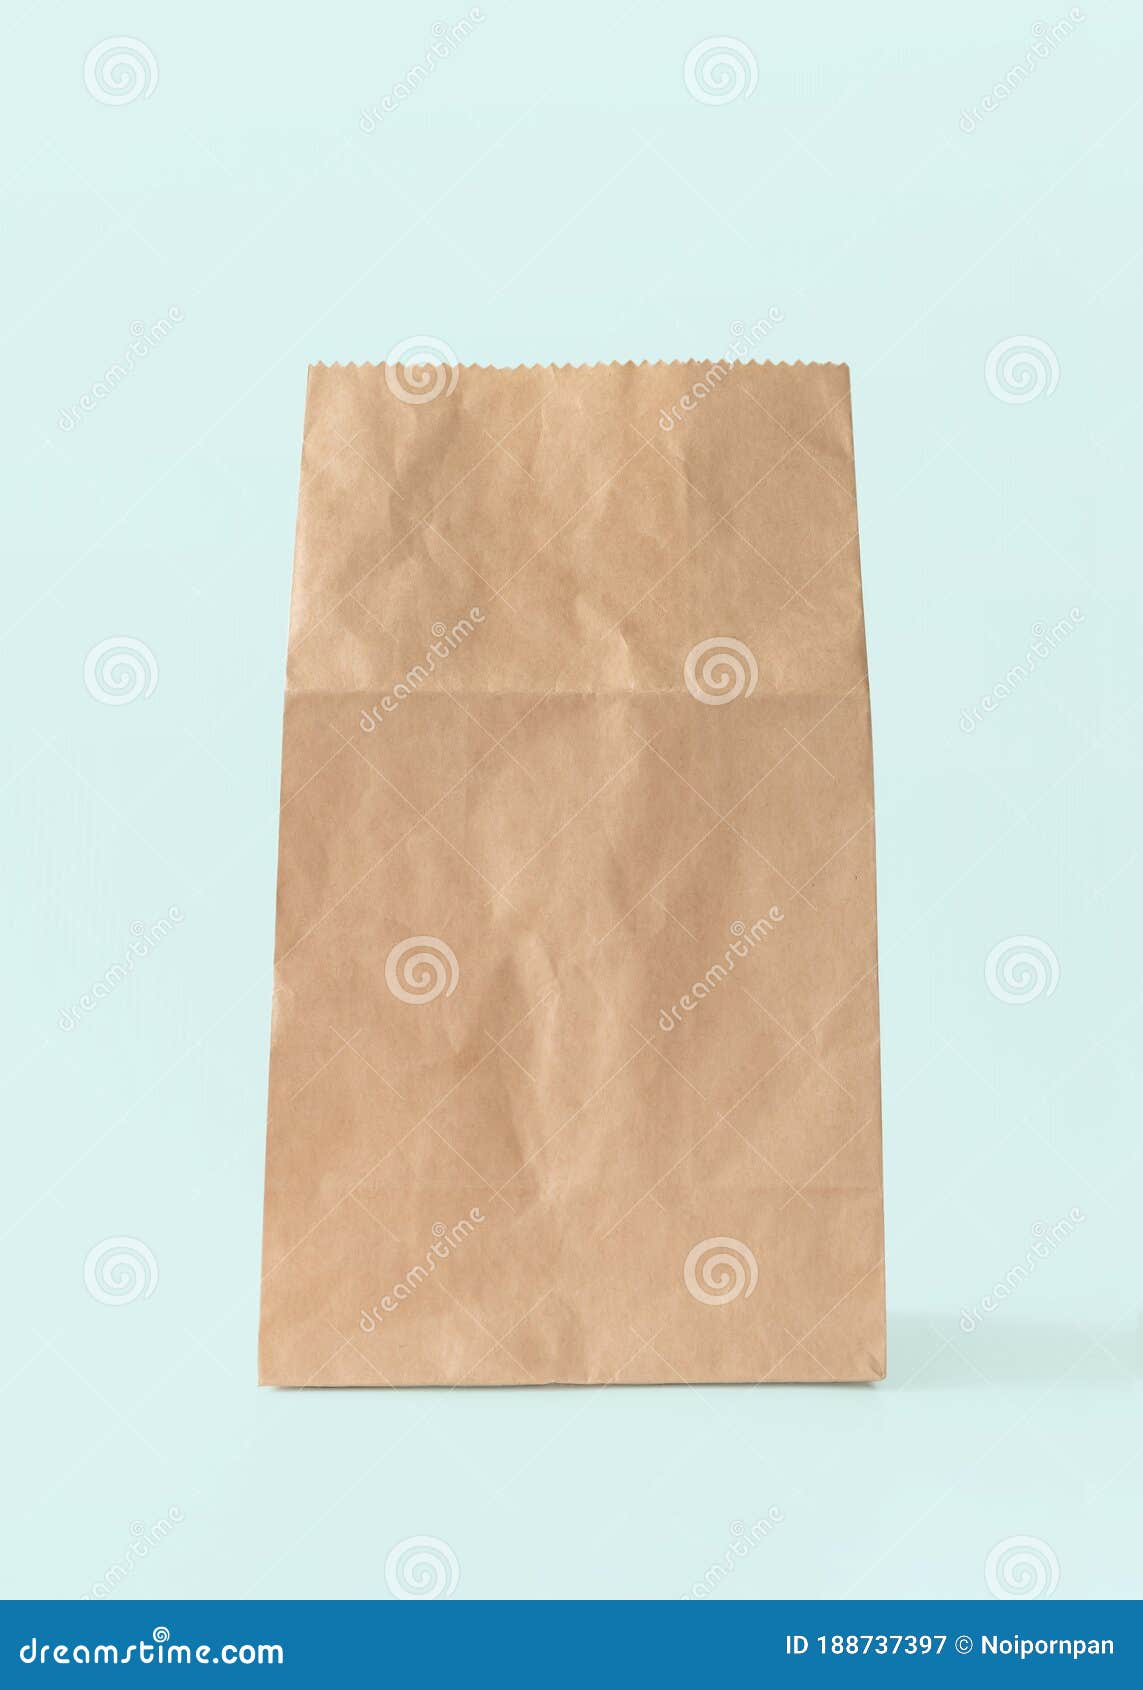 Download 6 000 Paper Bag Food Mockup Photos Free Royalty Free Stock Photos From Dreamstime